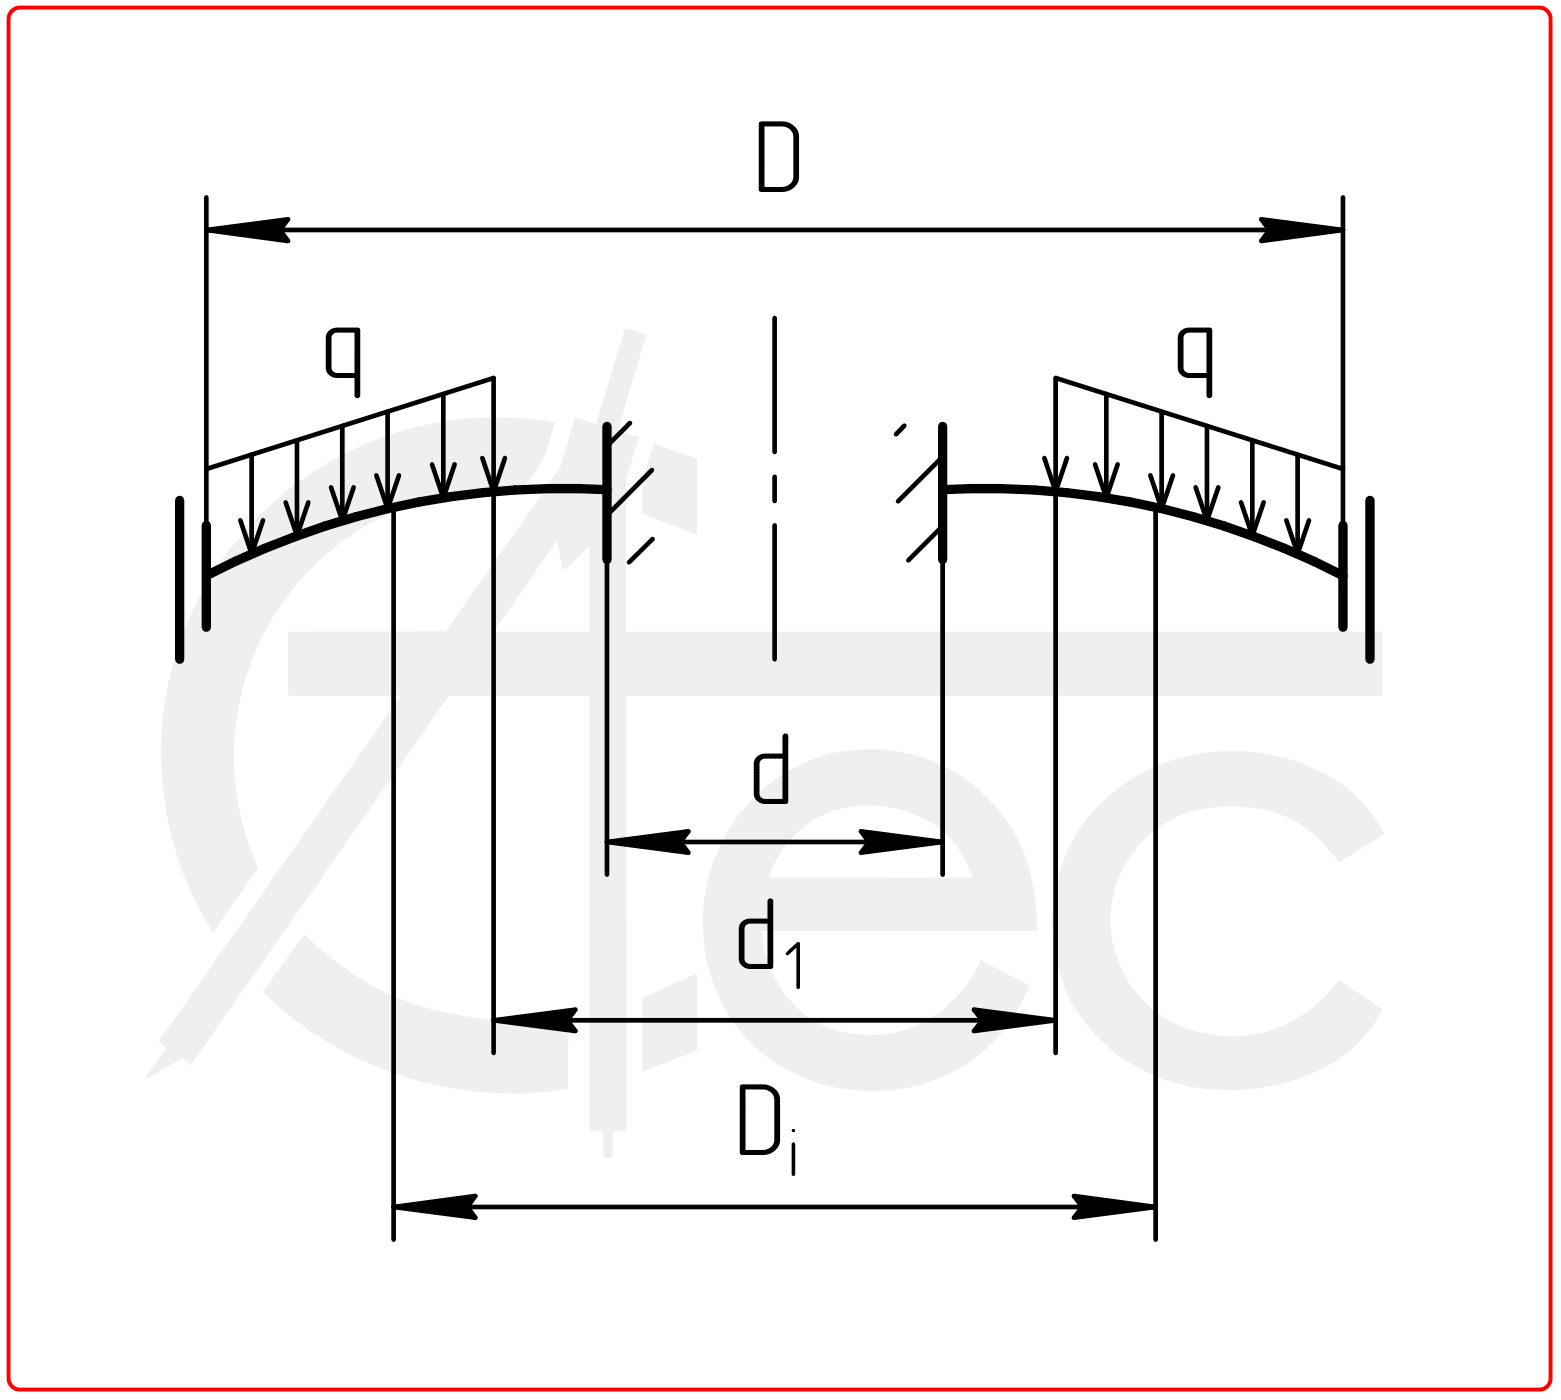 Circle plate with outer edge slided and inner edge fixed under uniform load